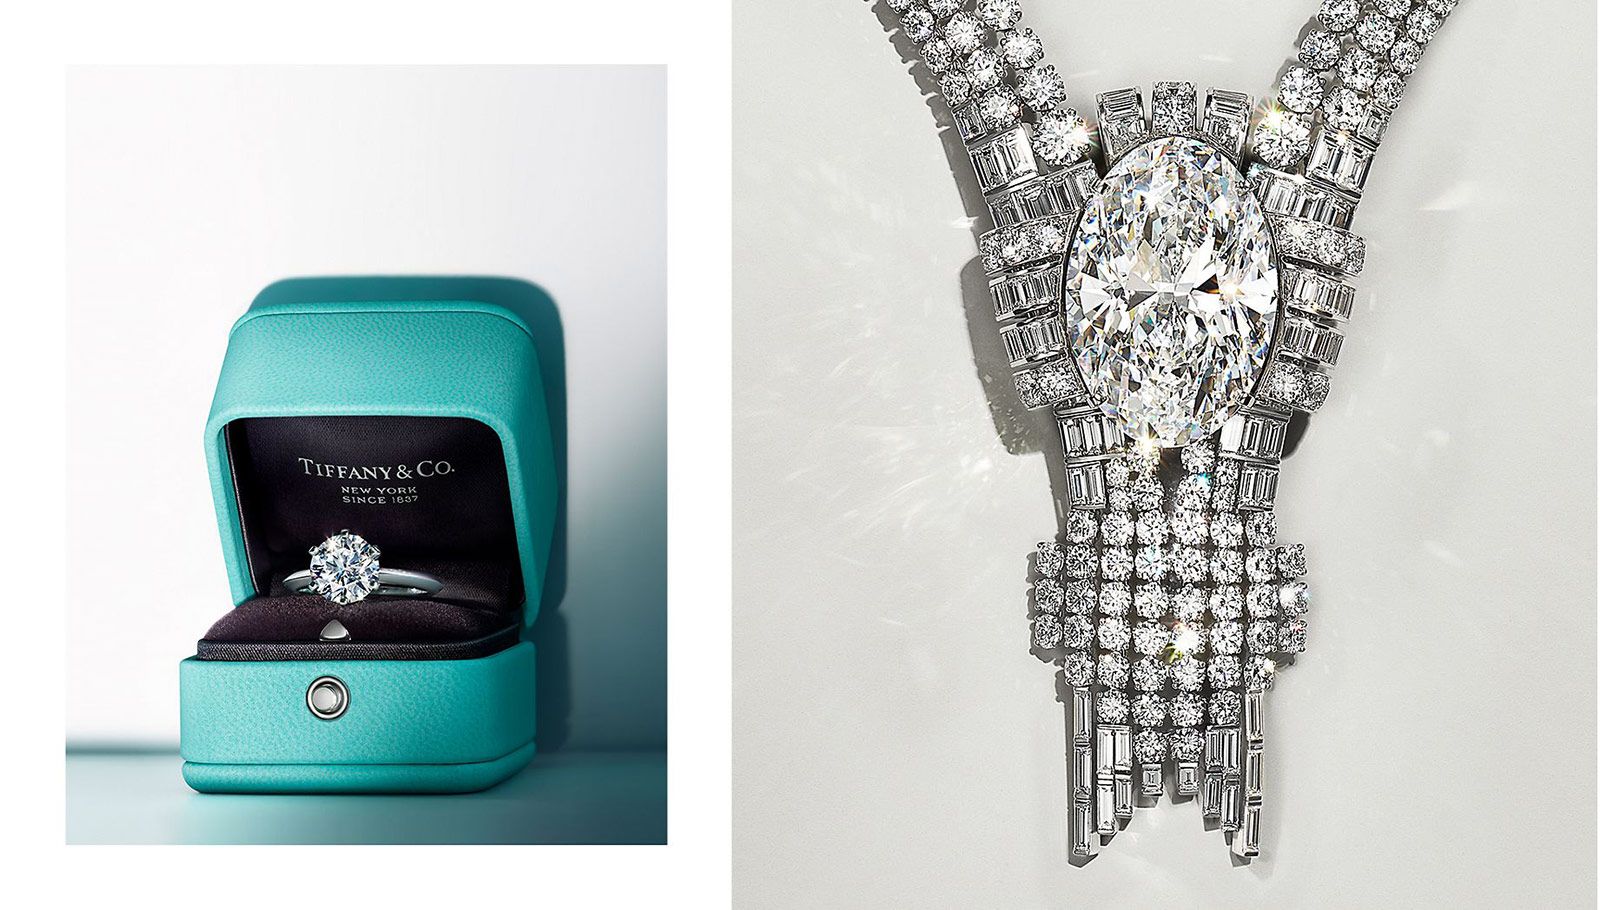 From left to right: A Tiffany & Co. engagement ring featuring the Tiffany setting and a diamond necklace with a Type IIa oval-shaped diamond of more than 80 carats 